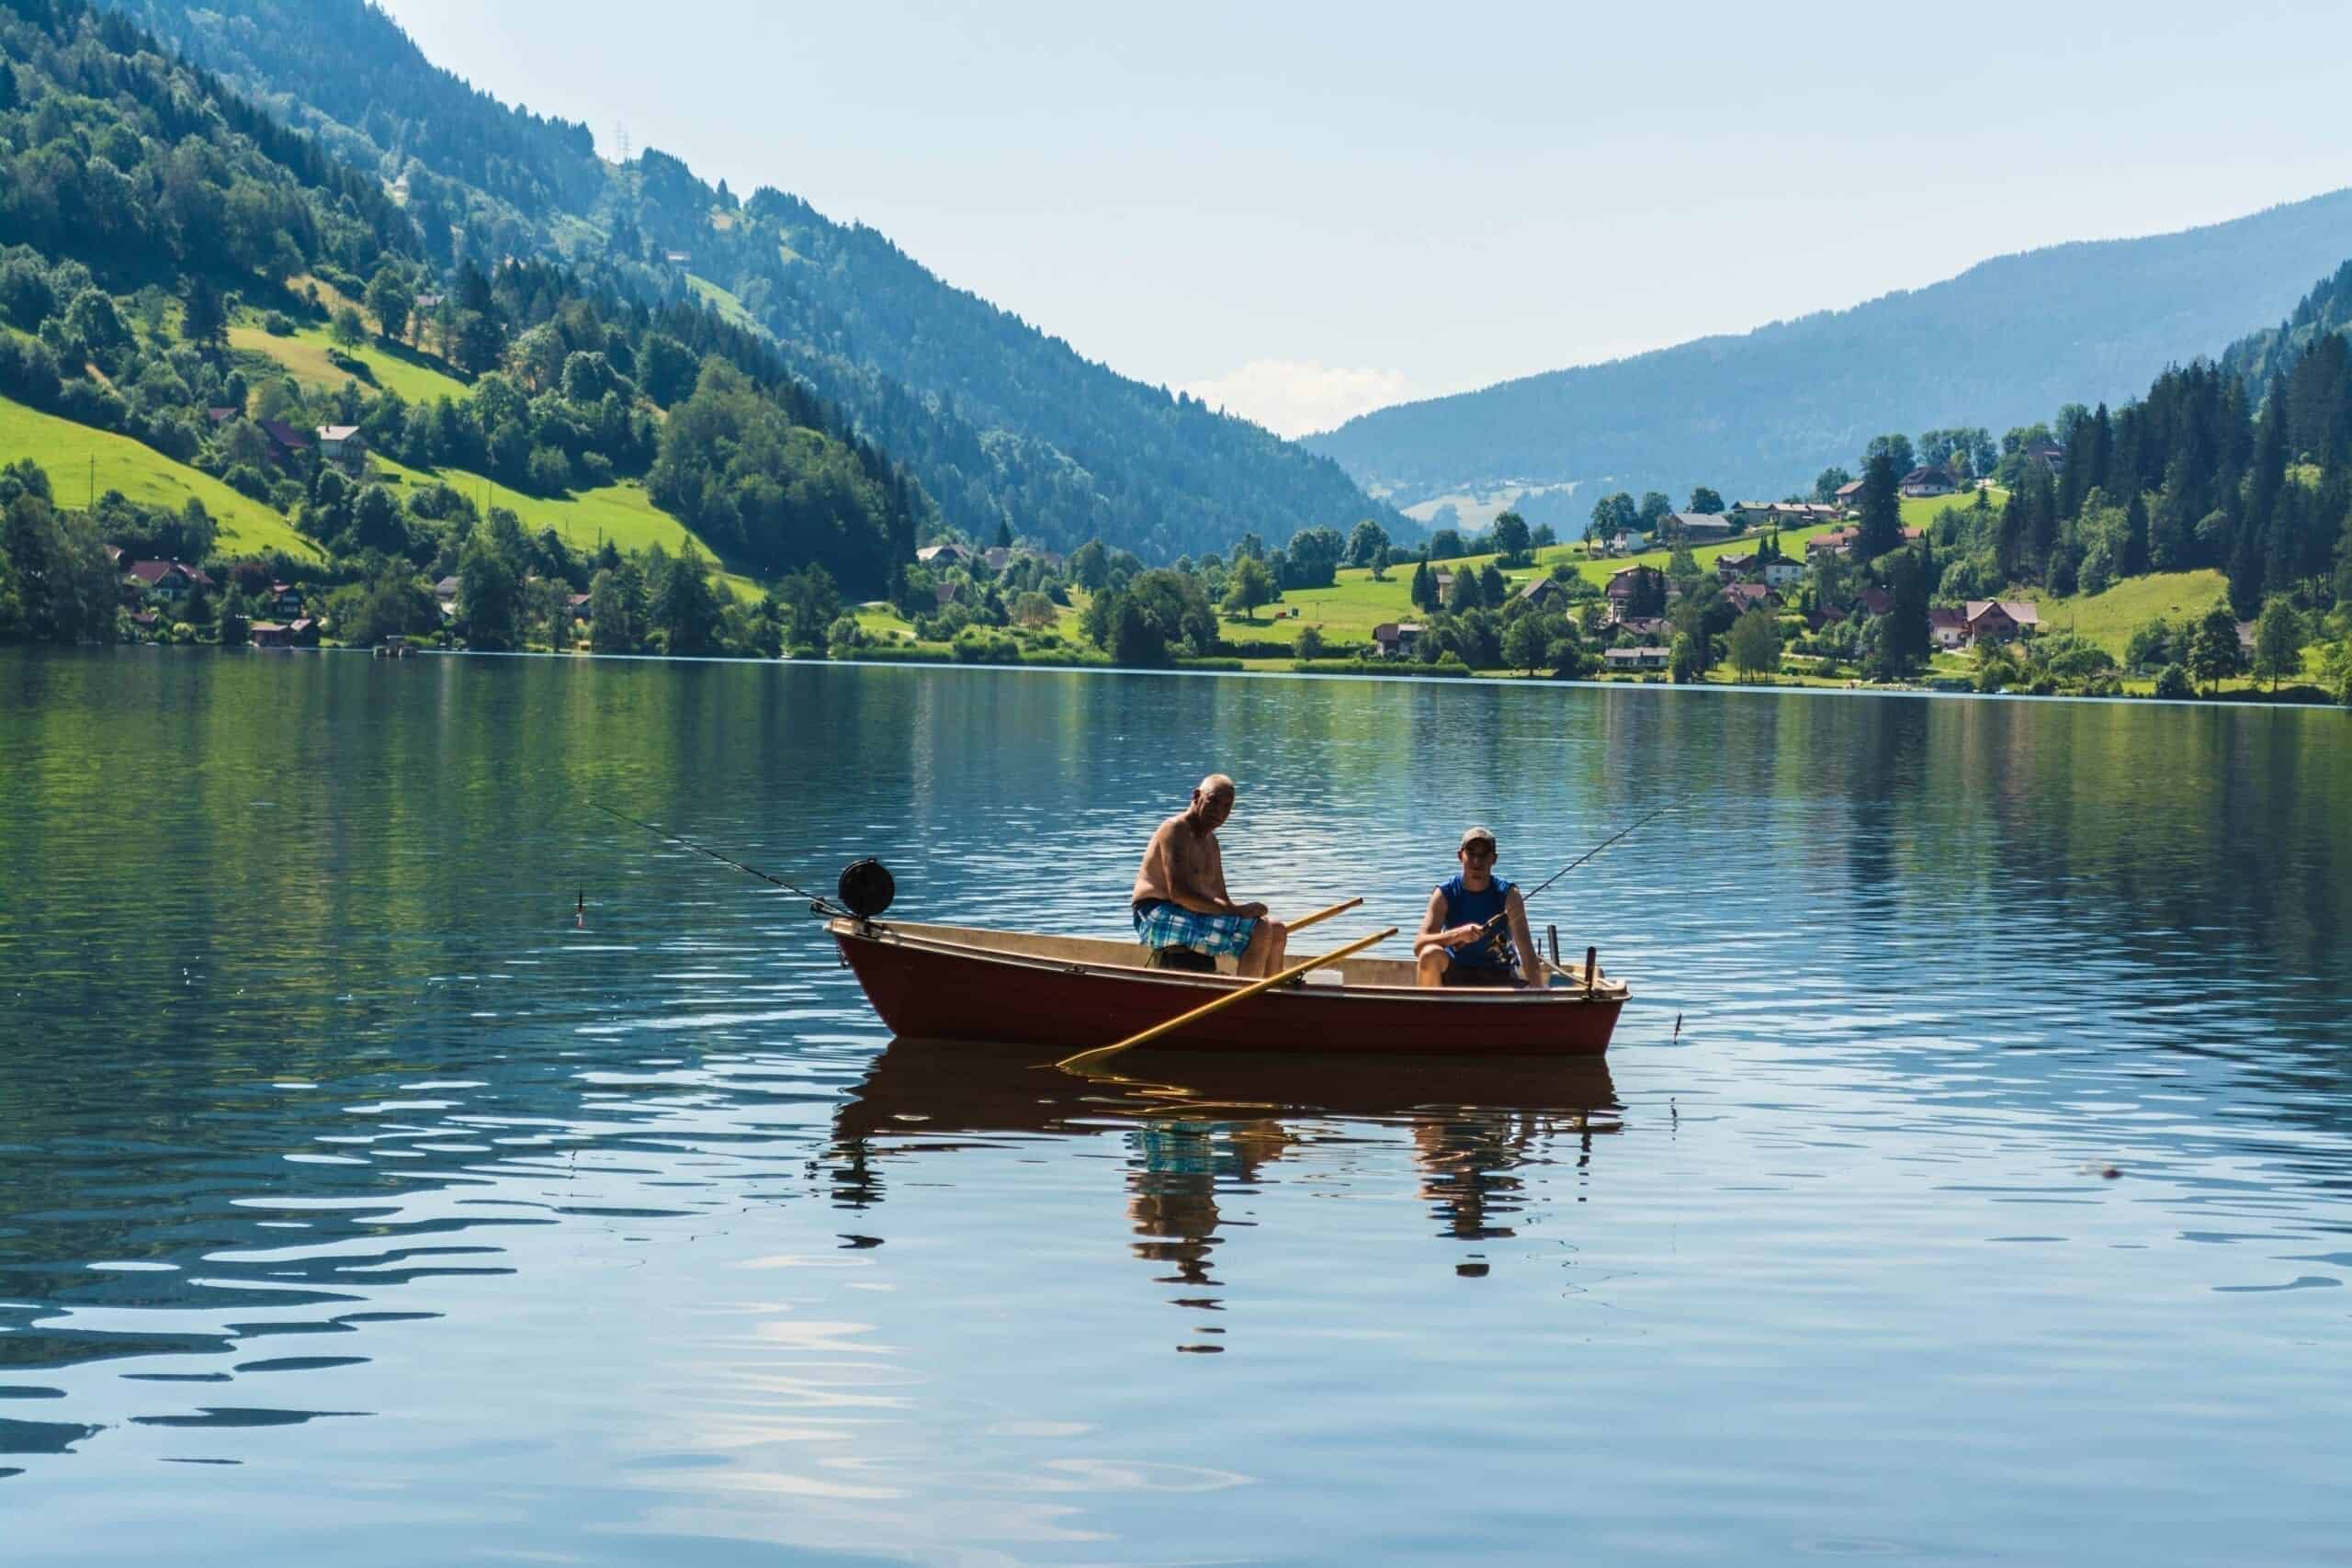 The Hotel Brennseehof has boats for fishing trips!